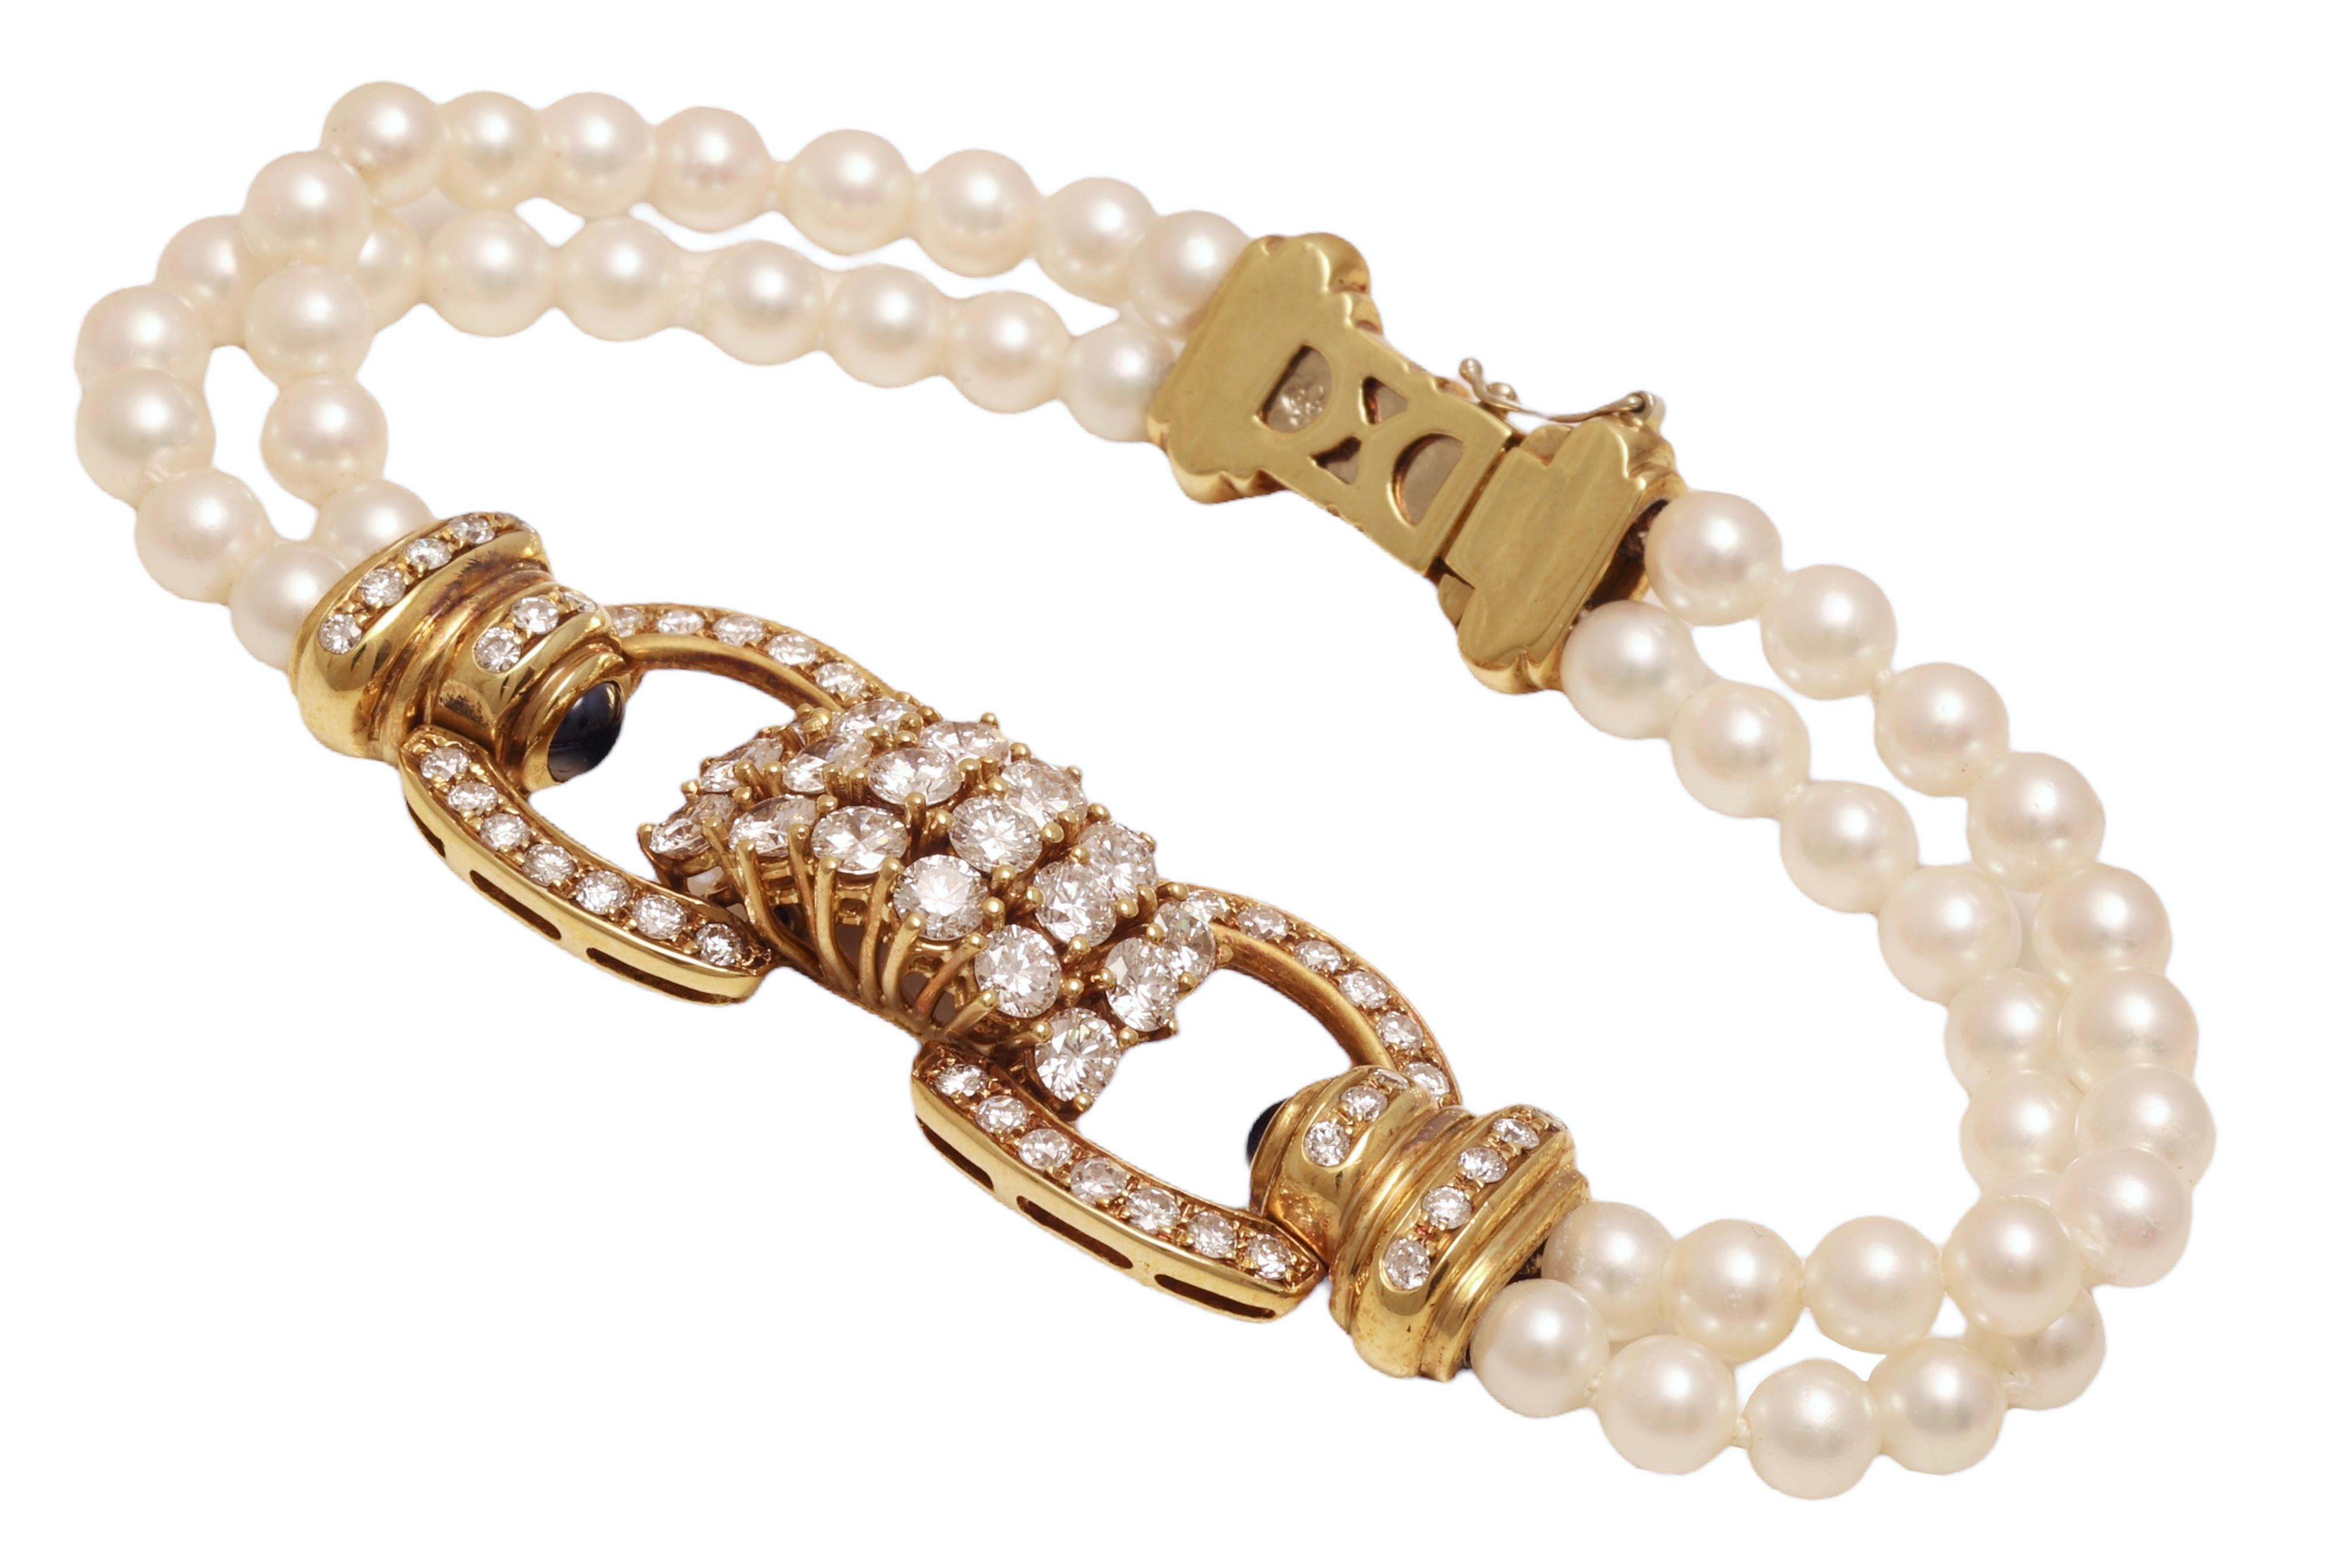 Pearl Bracelet in 18kt Yellow Gold Set With 3.58ct. Diamonds, Pearls & Sapphires For Sale 1